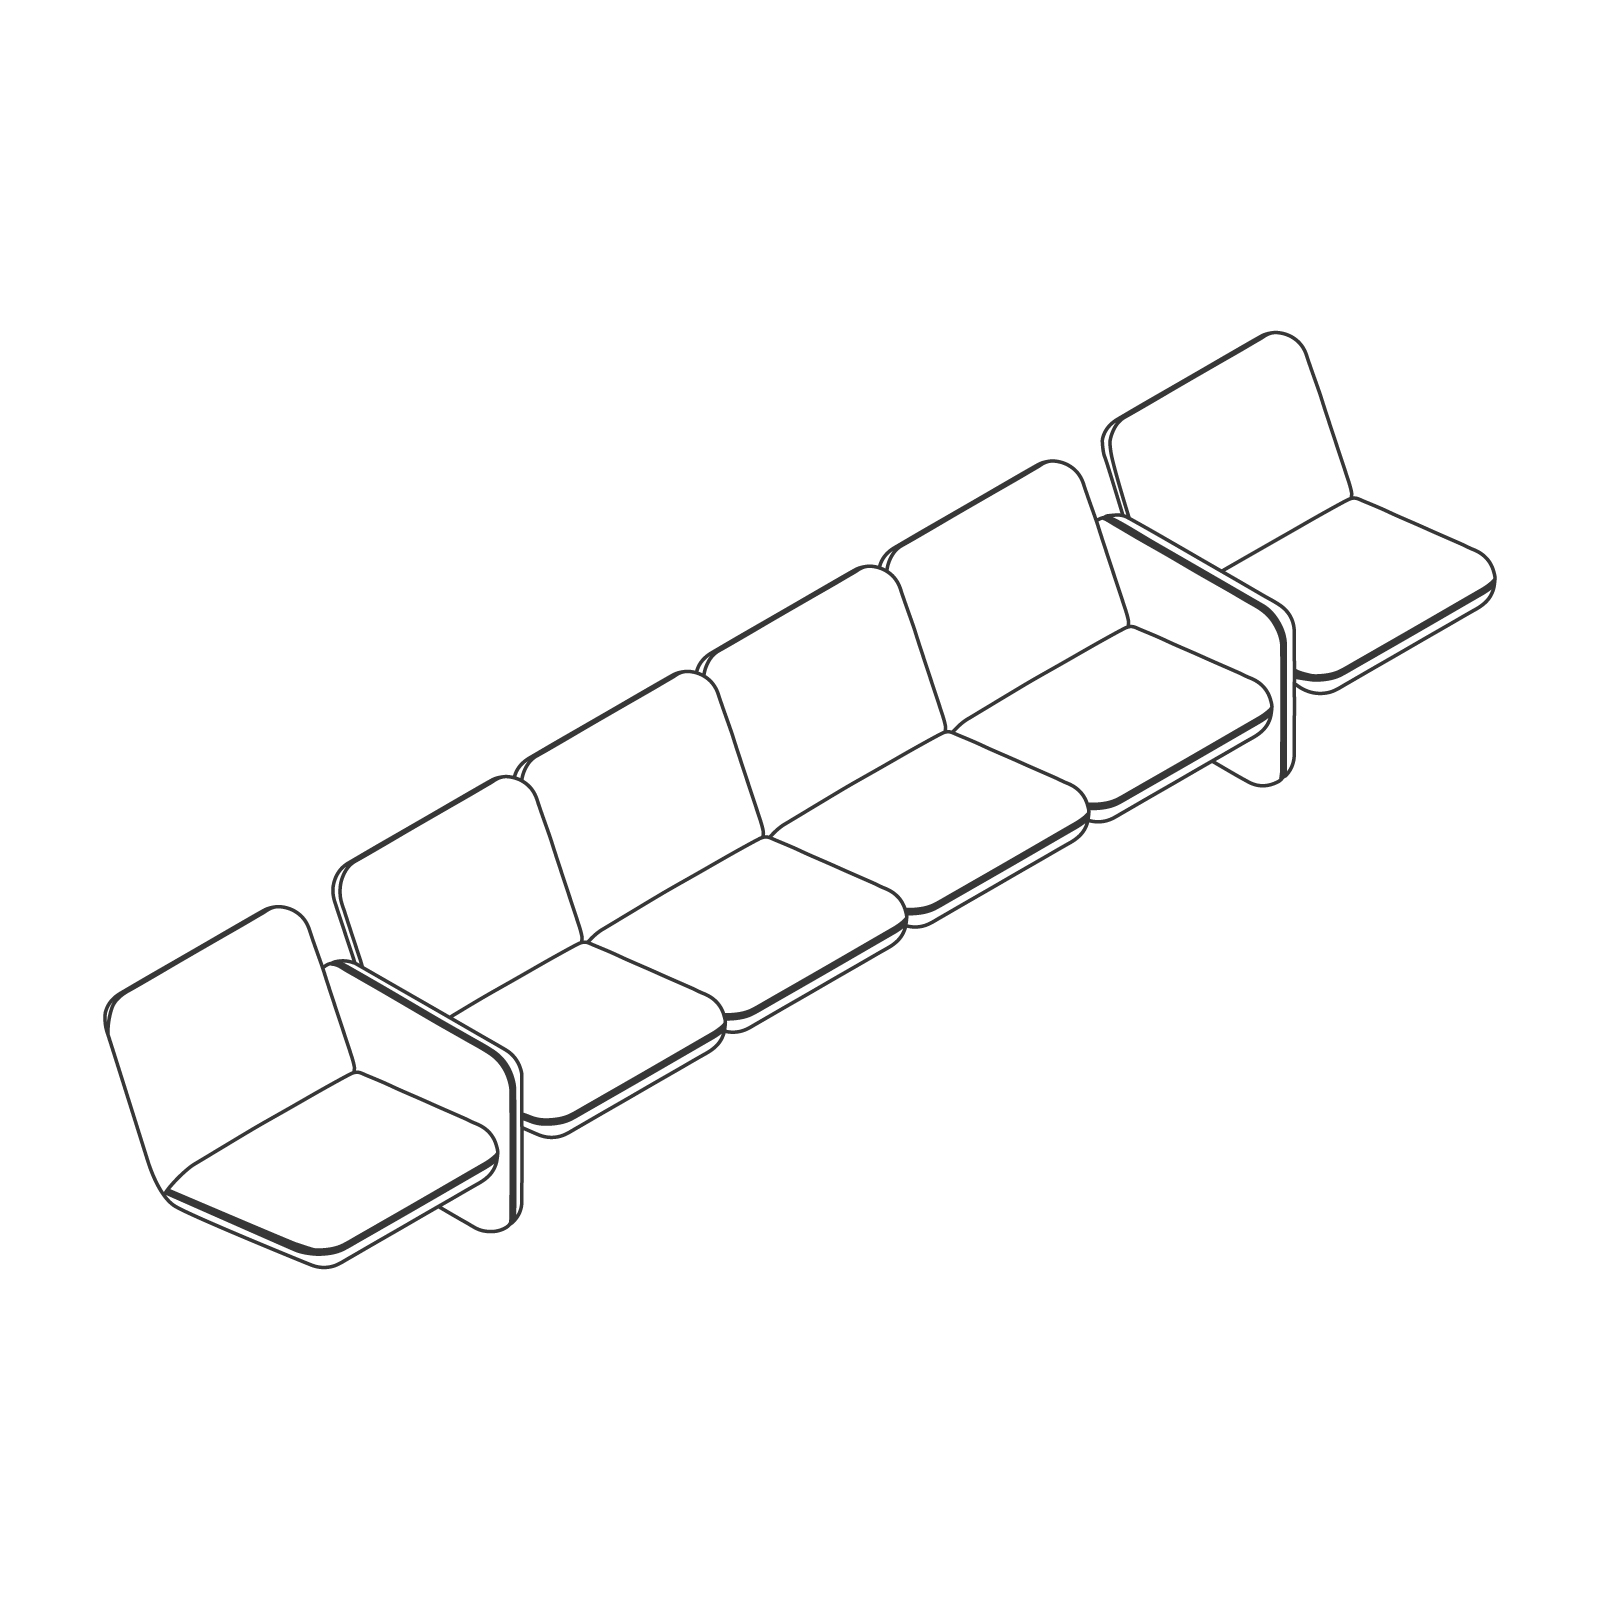 A line drawing – Wilkes Modular Sofa Group – 6-Seat